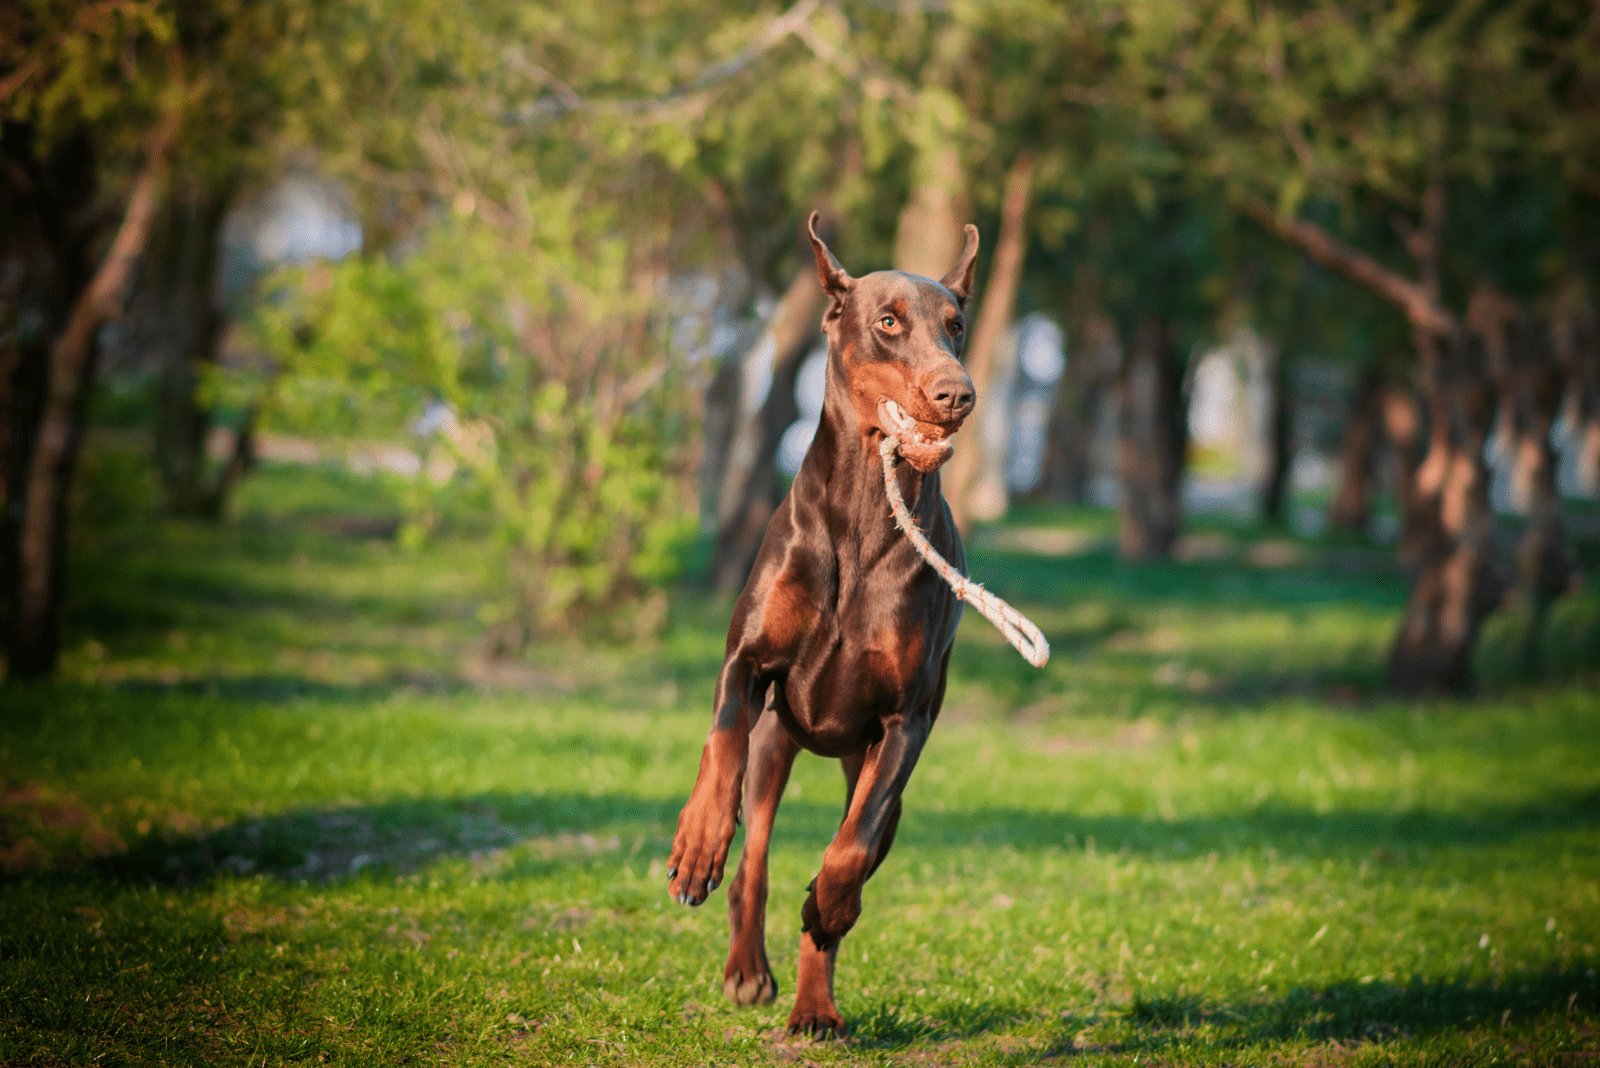 brown doberman running across the field with saurgan in mouth